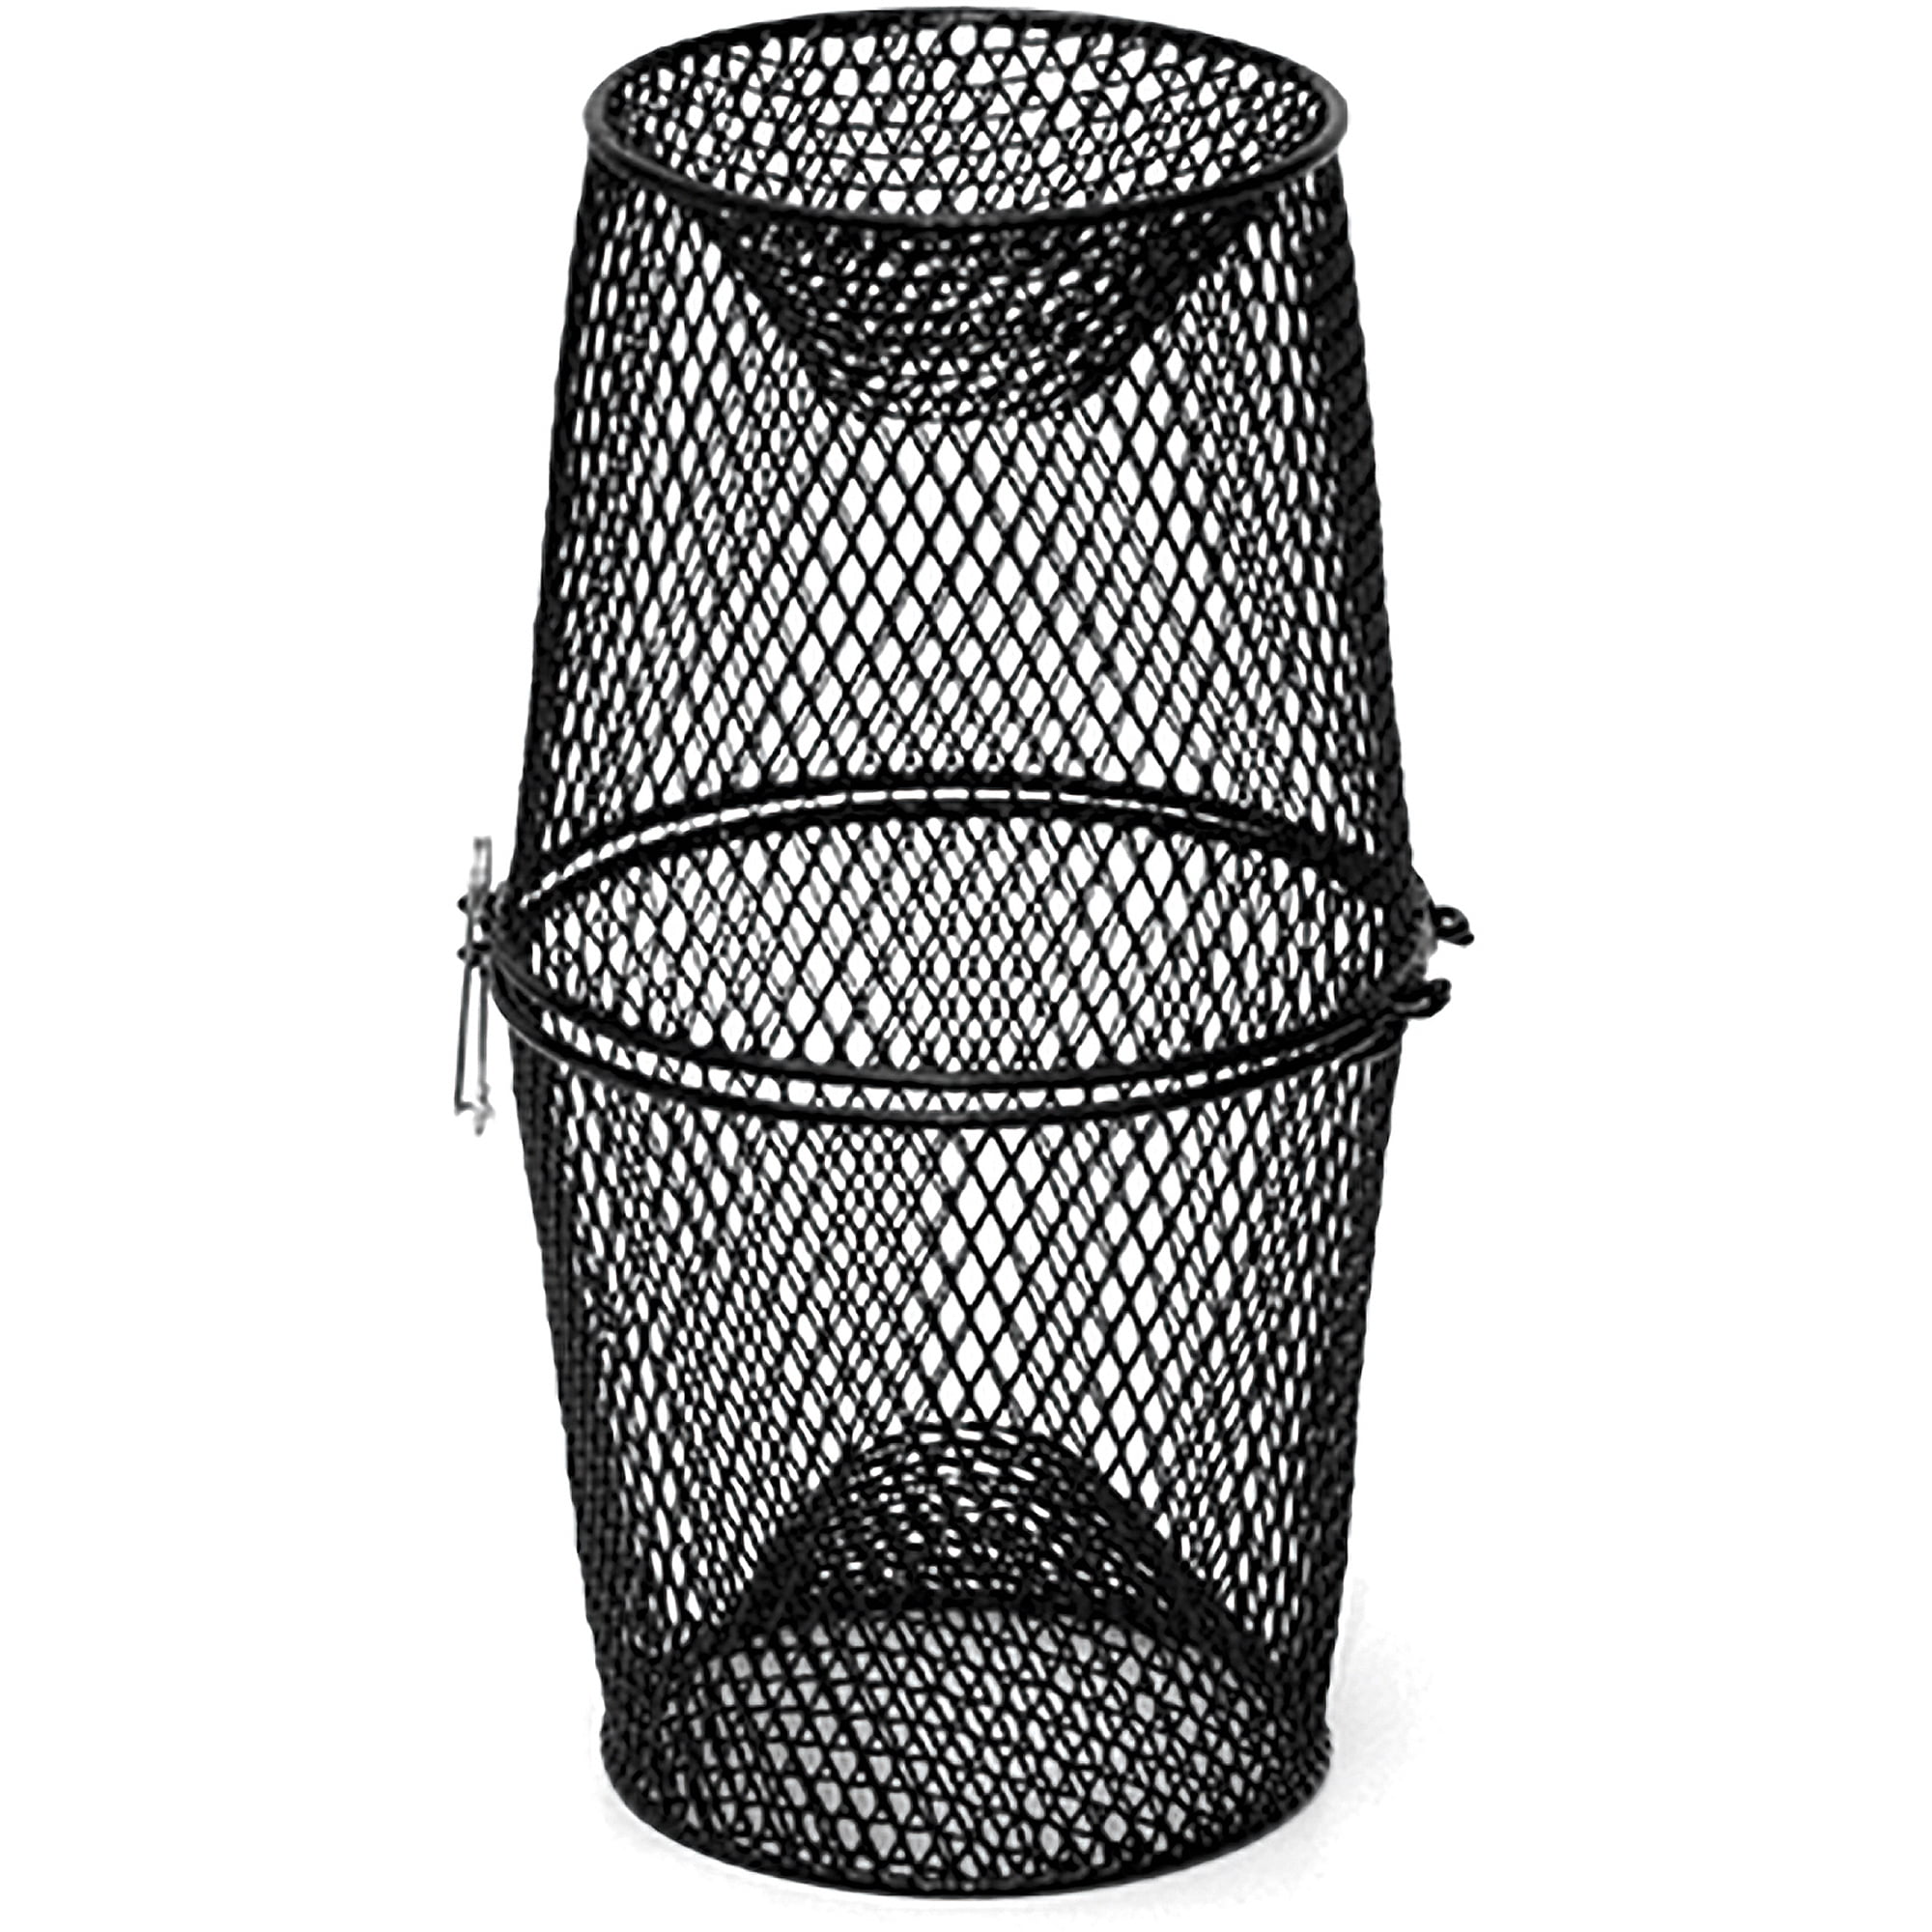 Frabill 1272 Crawfish Trap for sale online 